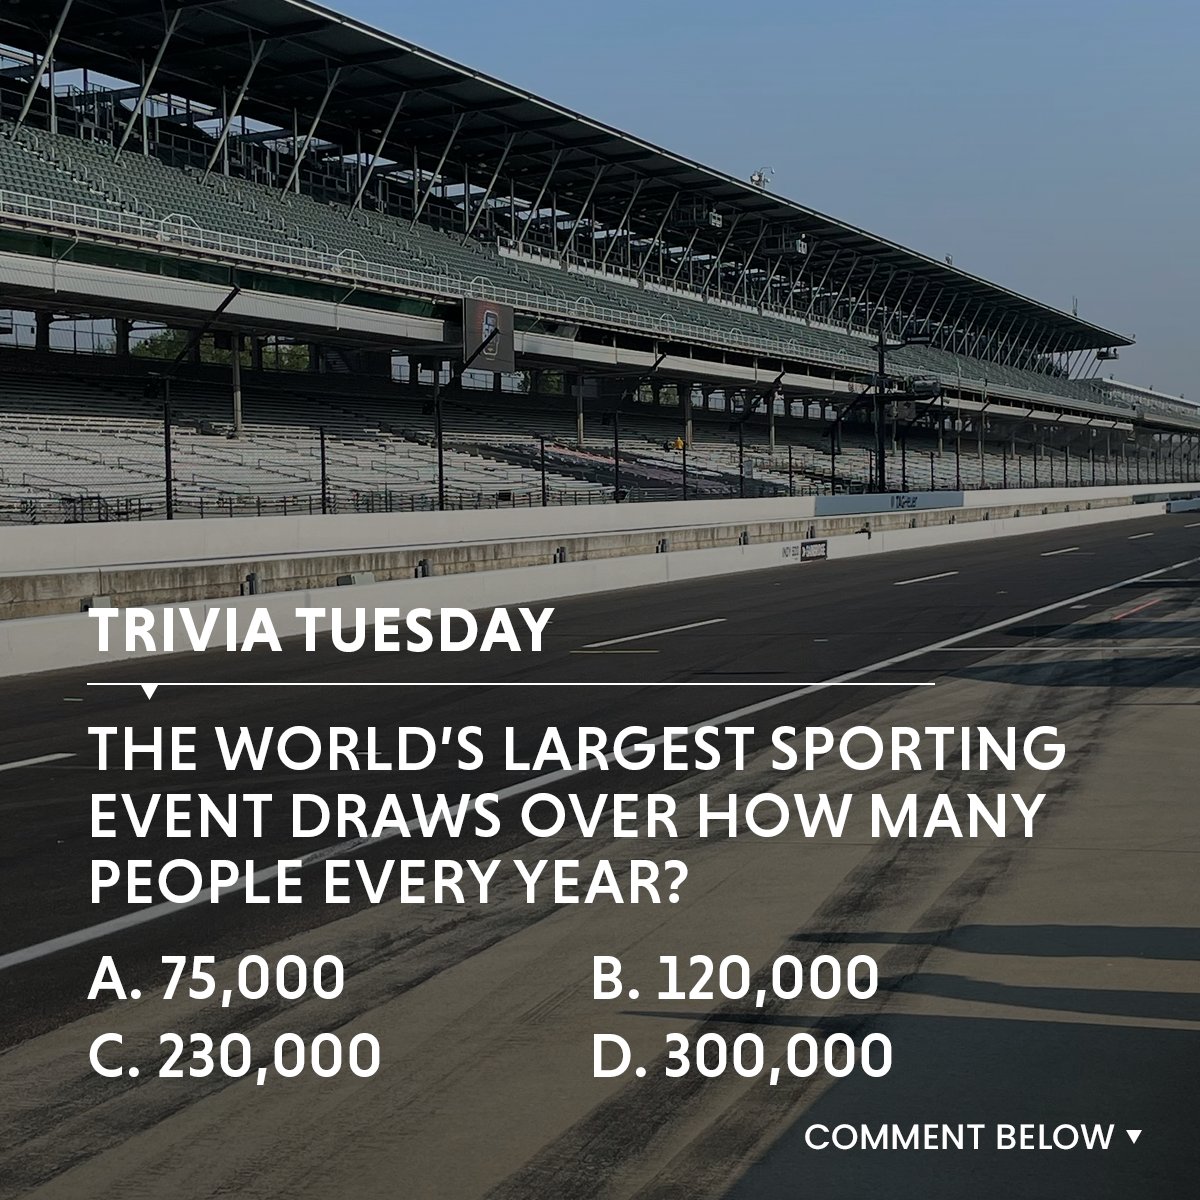 ⏳ The countdown is ON for 'The Greatest Spectacle in Racing!' 🏁 #Indy500 #ThisIsMay #LucasWorks #Indy #IMS #VisityIndy #Racing #RacingCapitalOfTheWorld #Trivia #Tuesday #TriviaTuesday